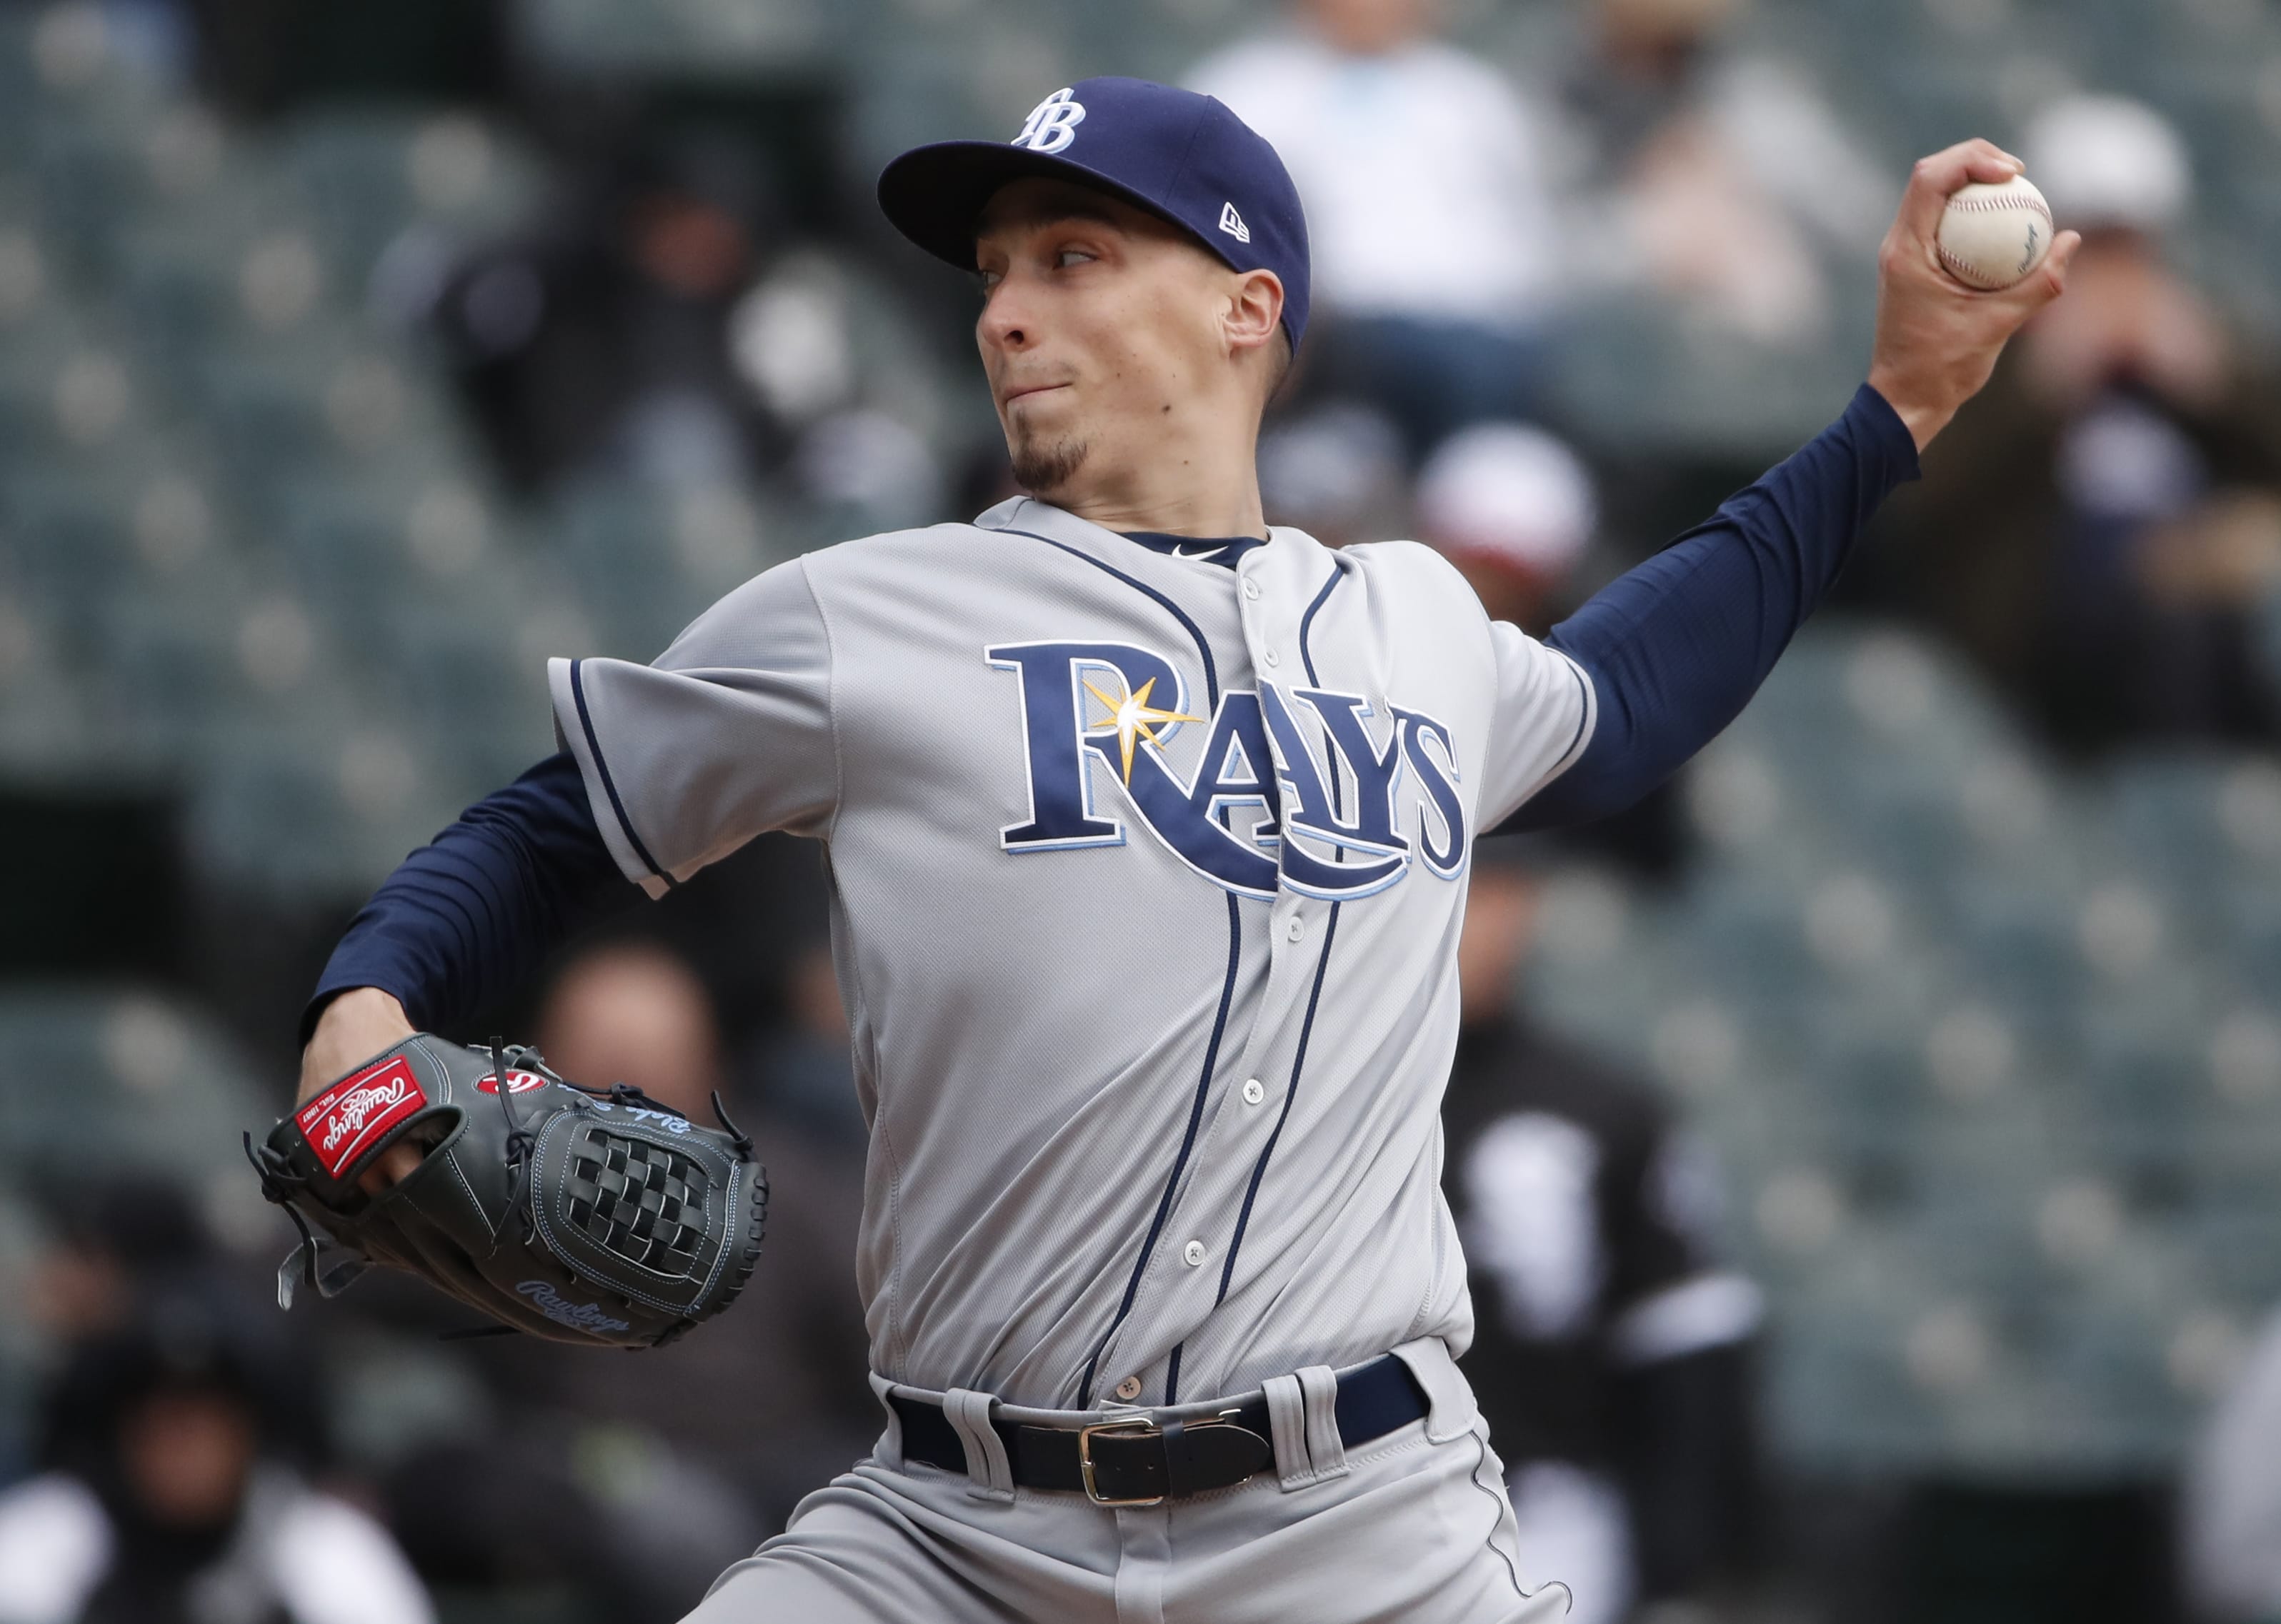 Tampa Bay Rays starting pitcher Blake Snell, a graduate of Shorewood High School, was announced as the winner of the American League Cy Young Award on Wednesday, Nov. 14, 2018.